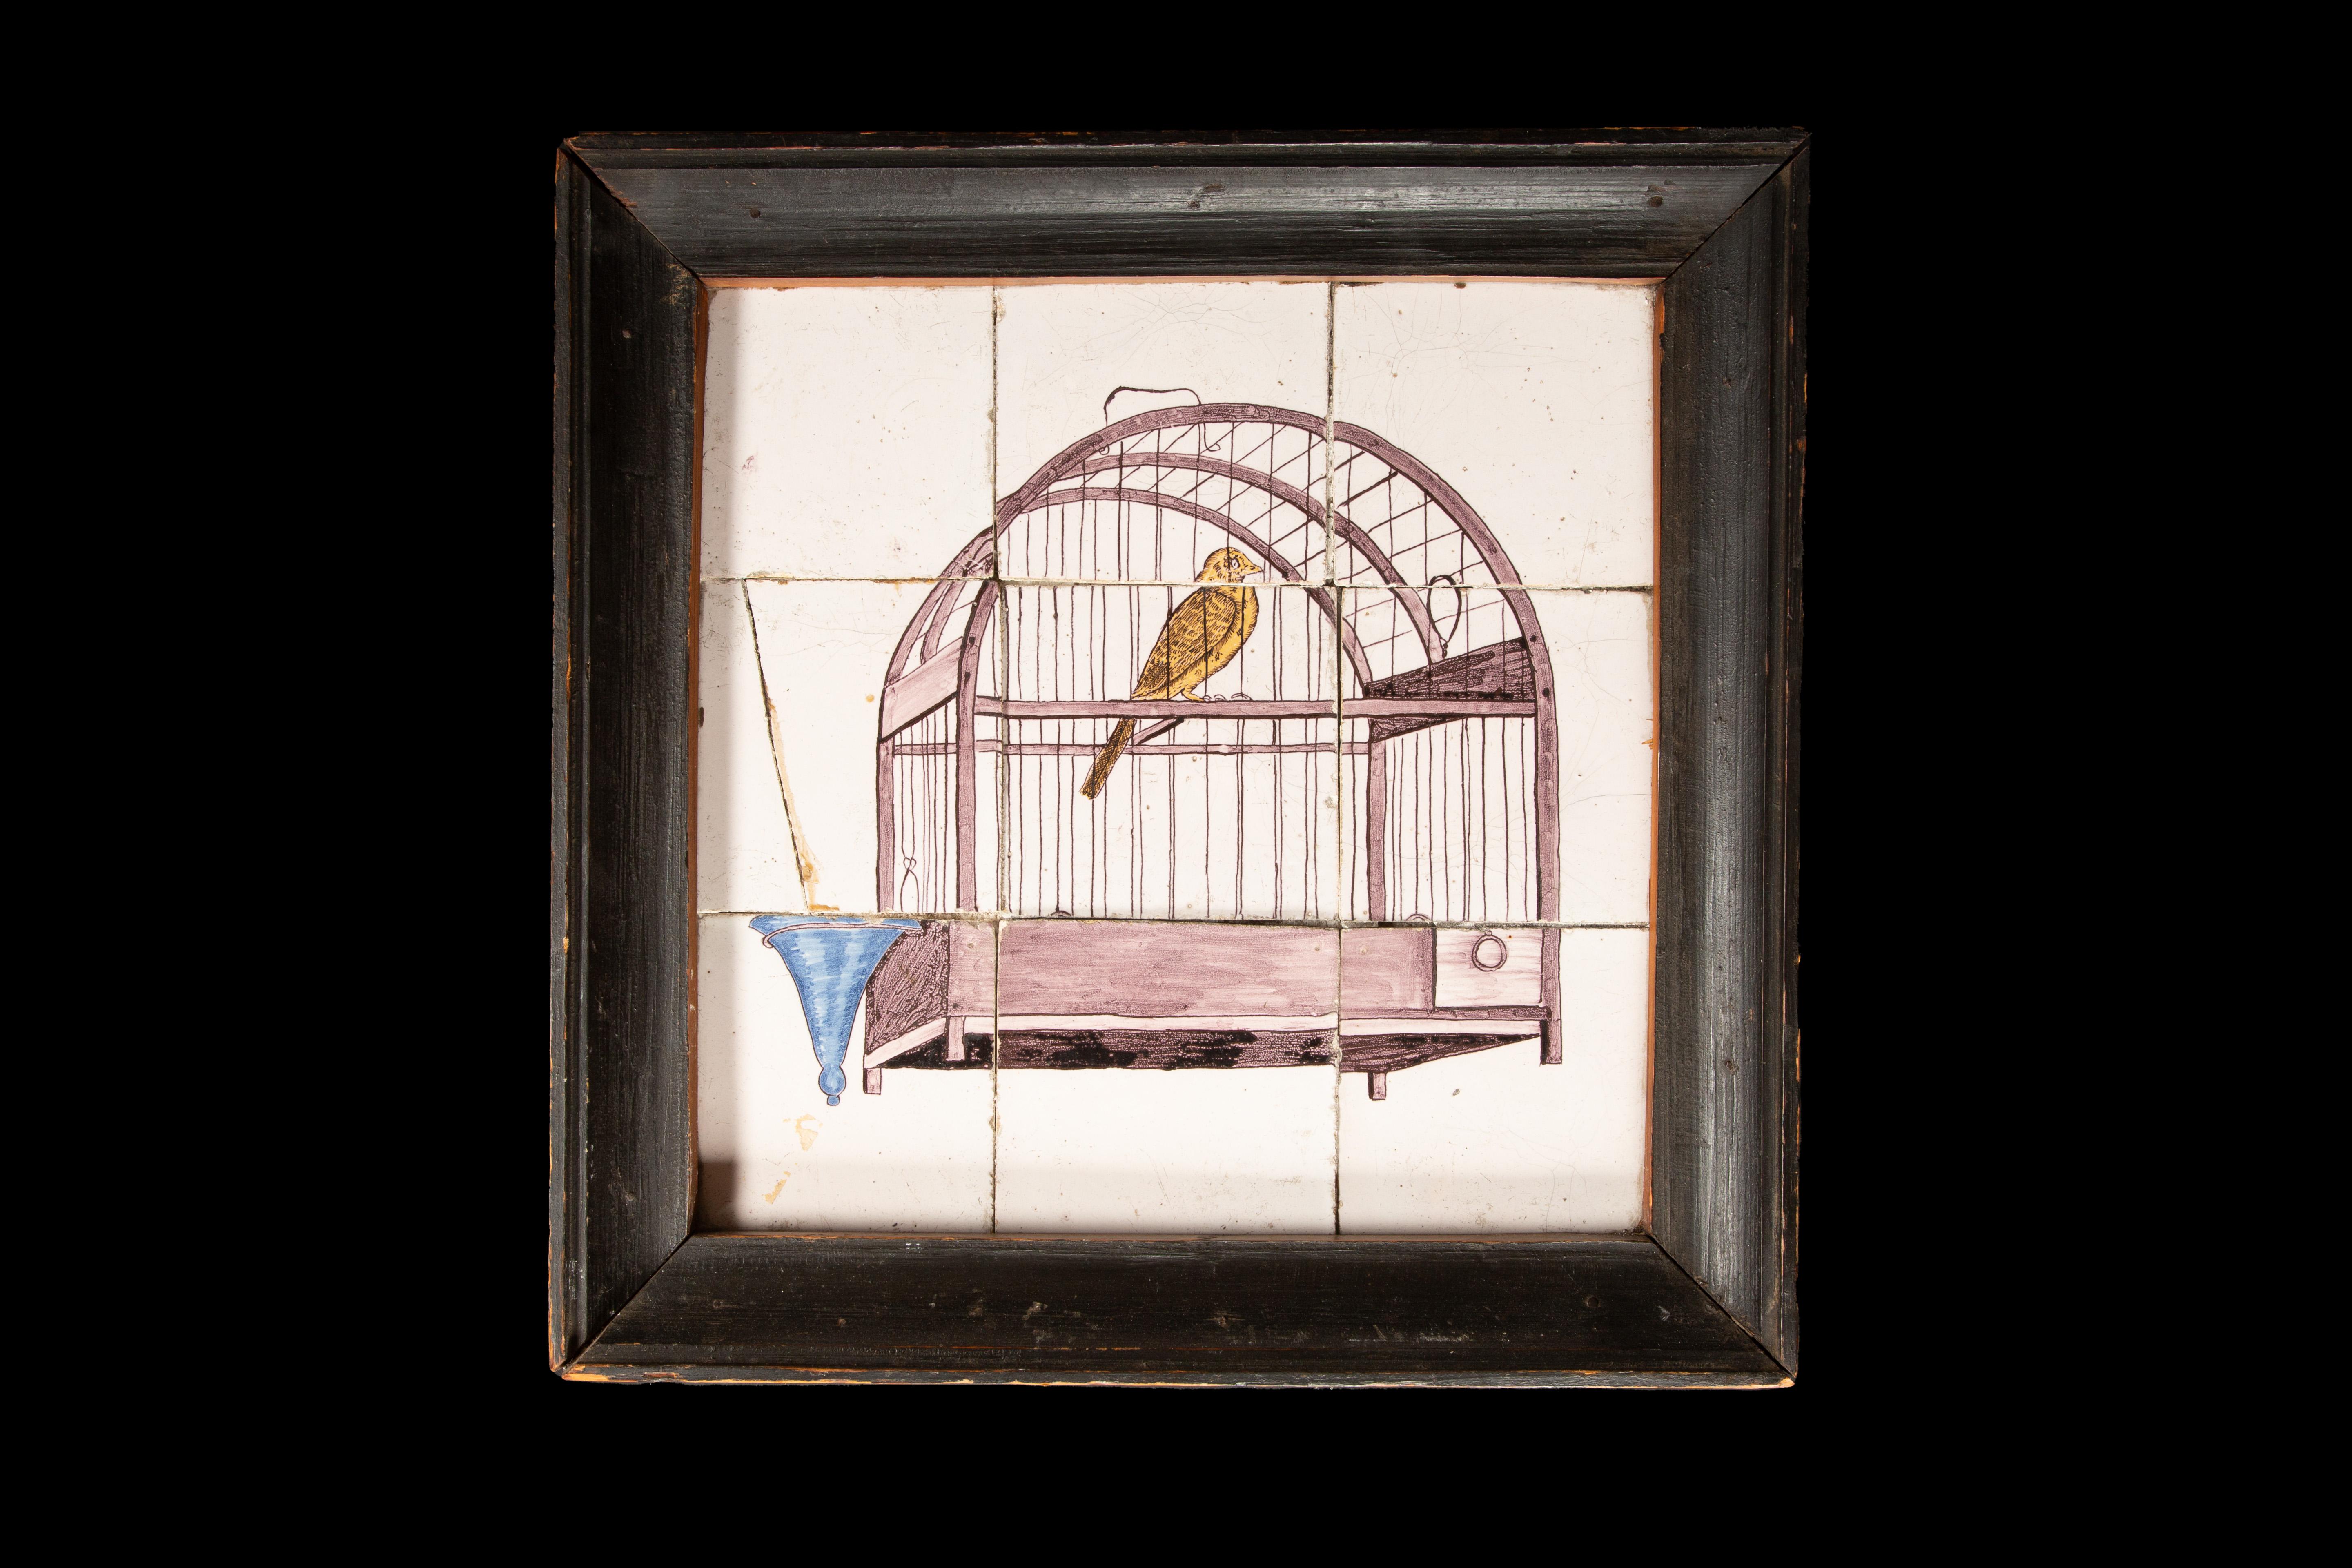 This 18th-century panel, crafted from nine earthenware tiles, showcases an intriguing depiction of a bird in a cage. The delicate white tiles contrast beautifully against the white background, highlighting the intricately painted bird and the